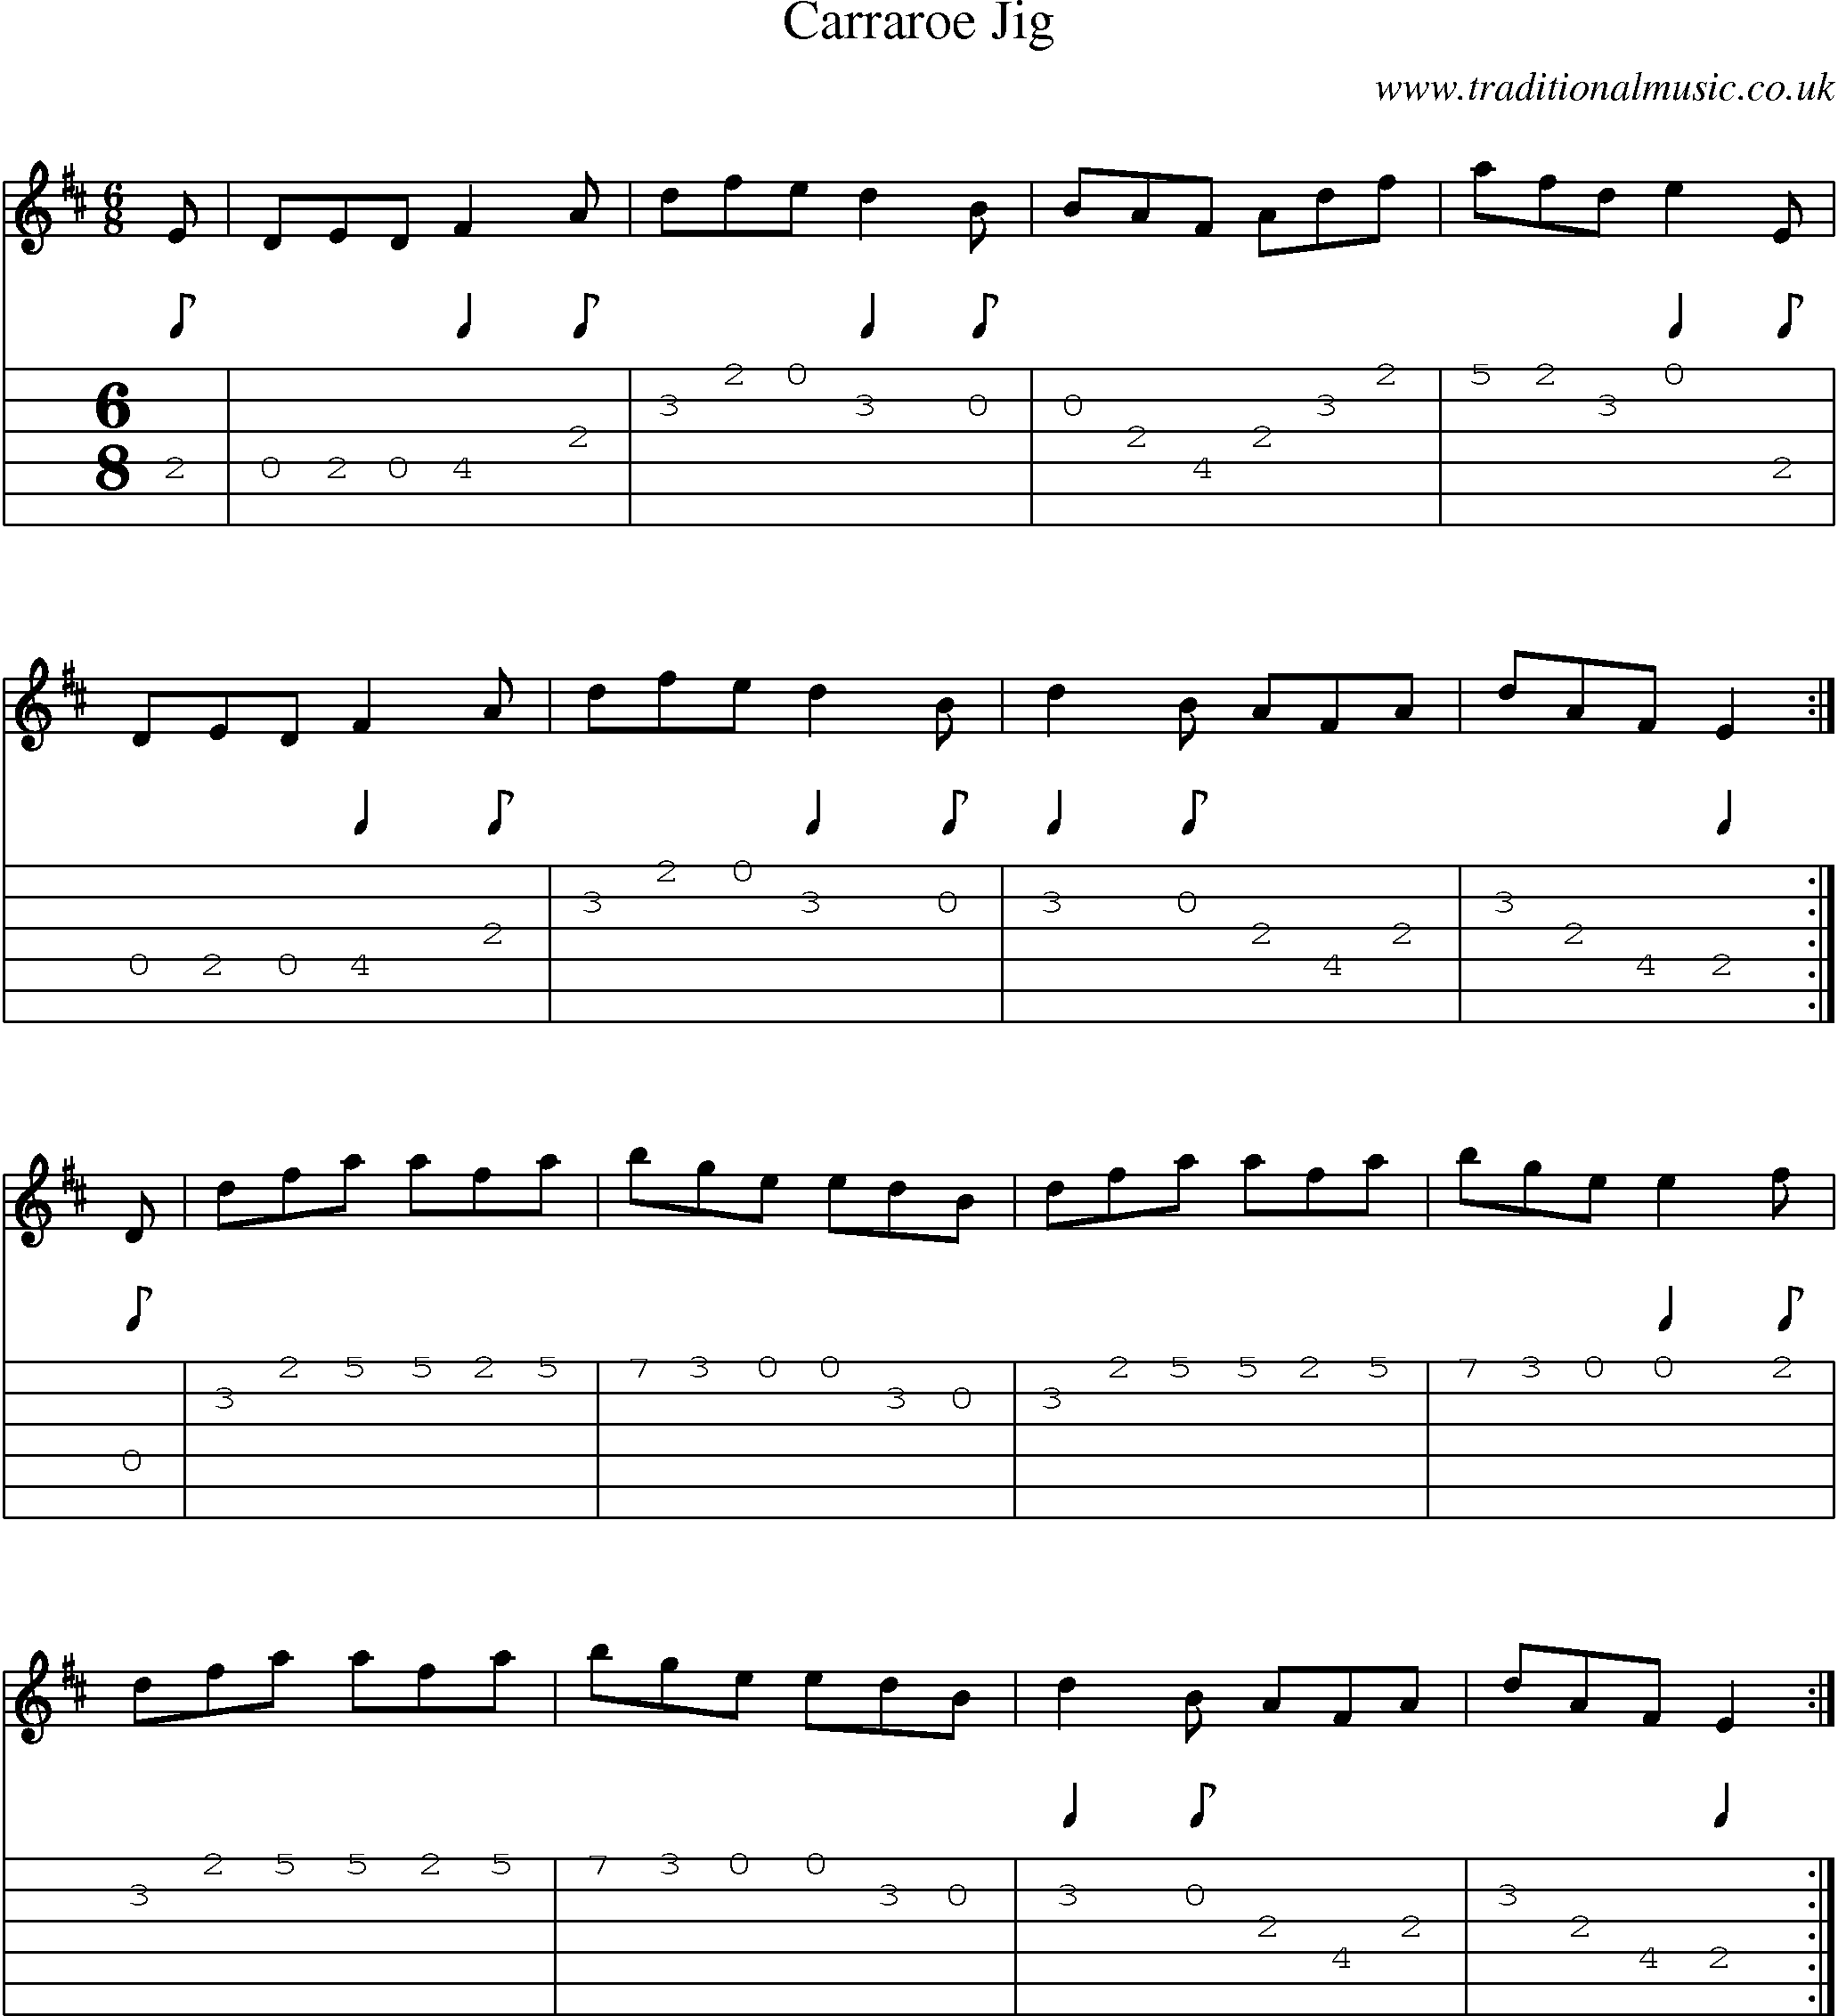 Music Score and Guitar Tabs for Carraroe Jig